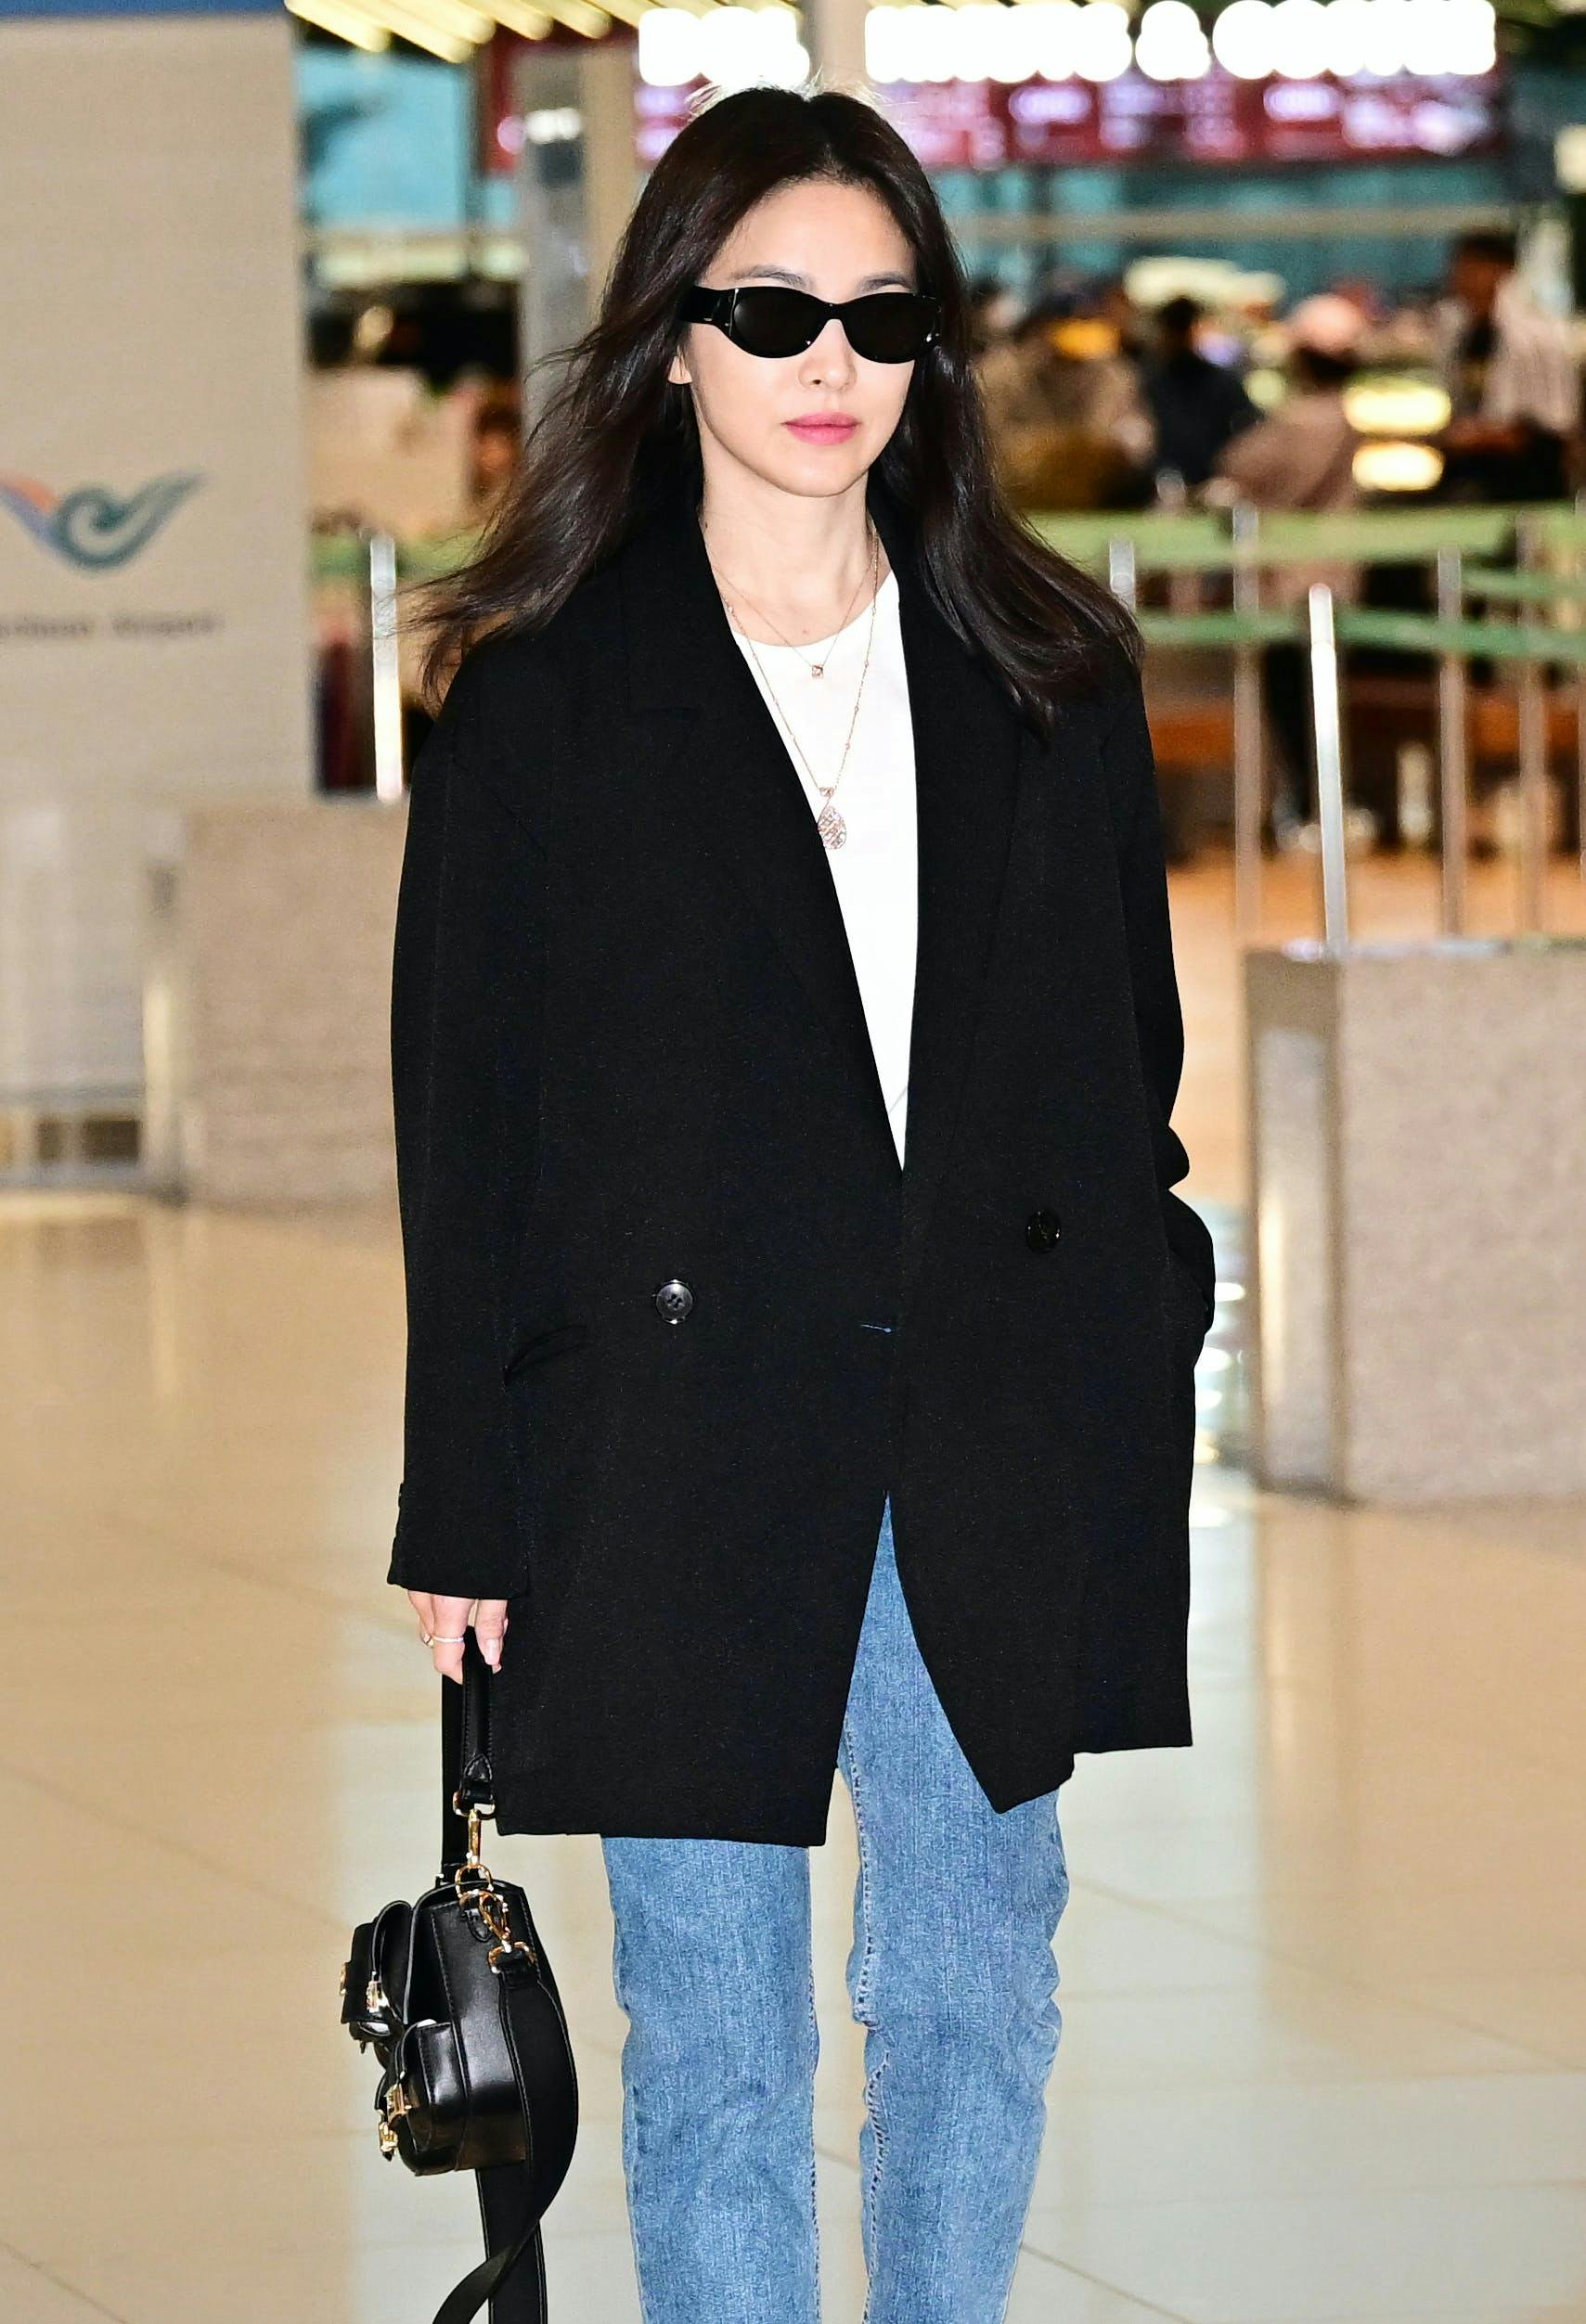 Song Hye-kyo Chaumet off duty look